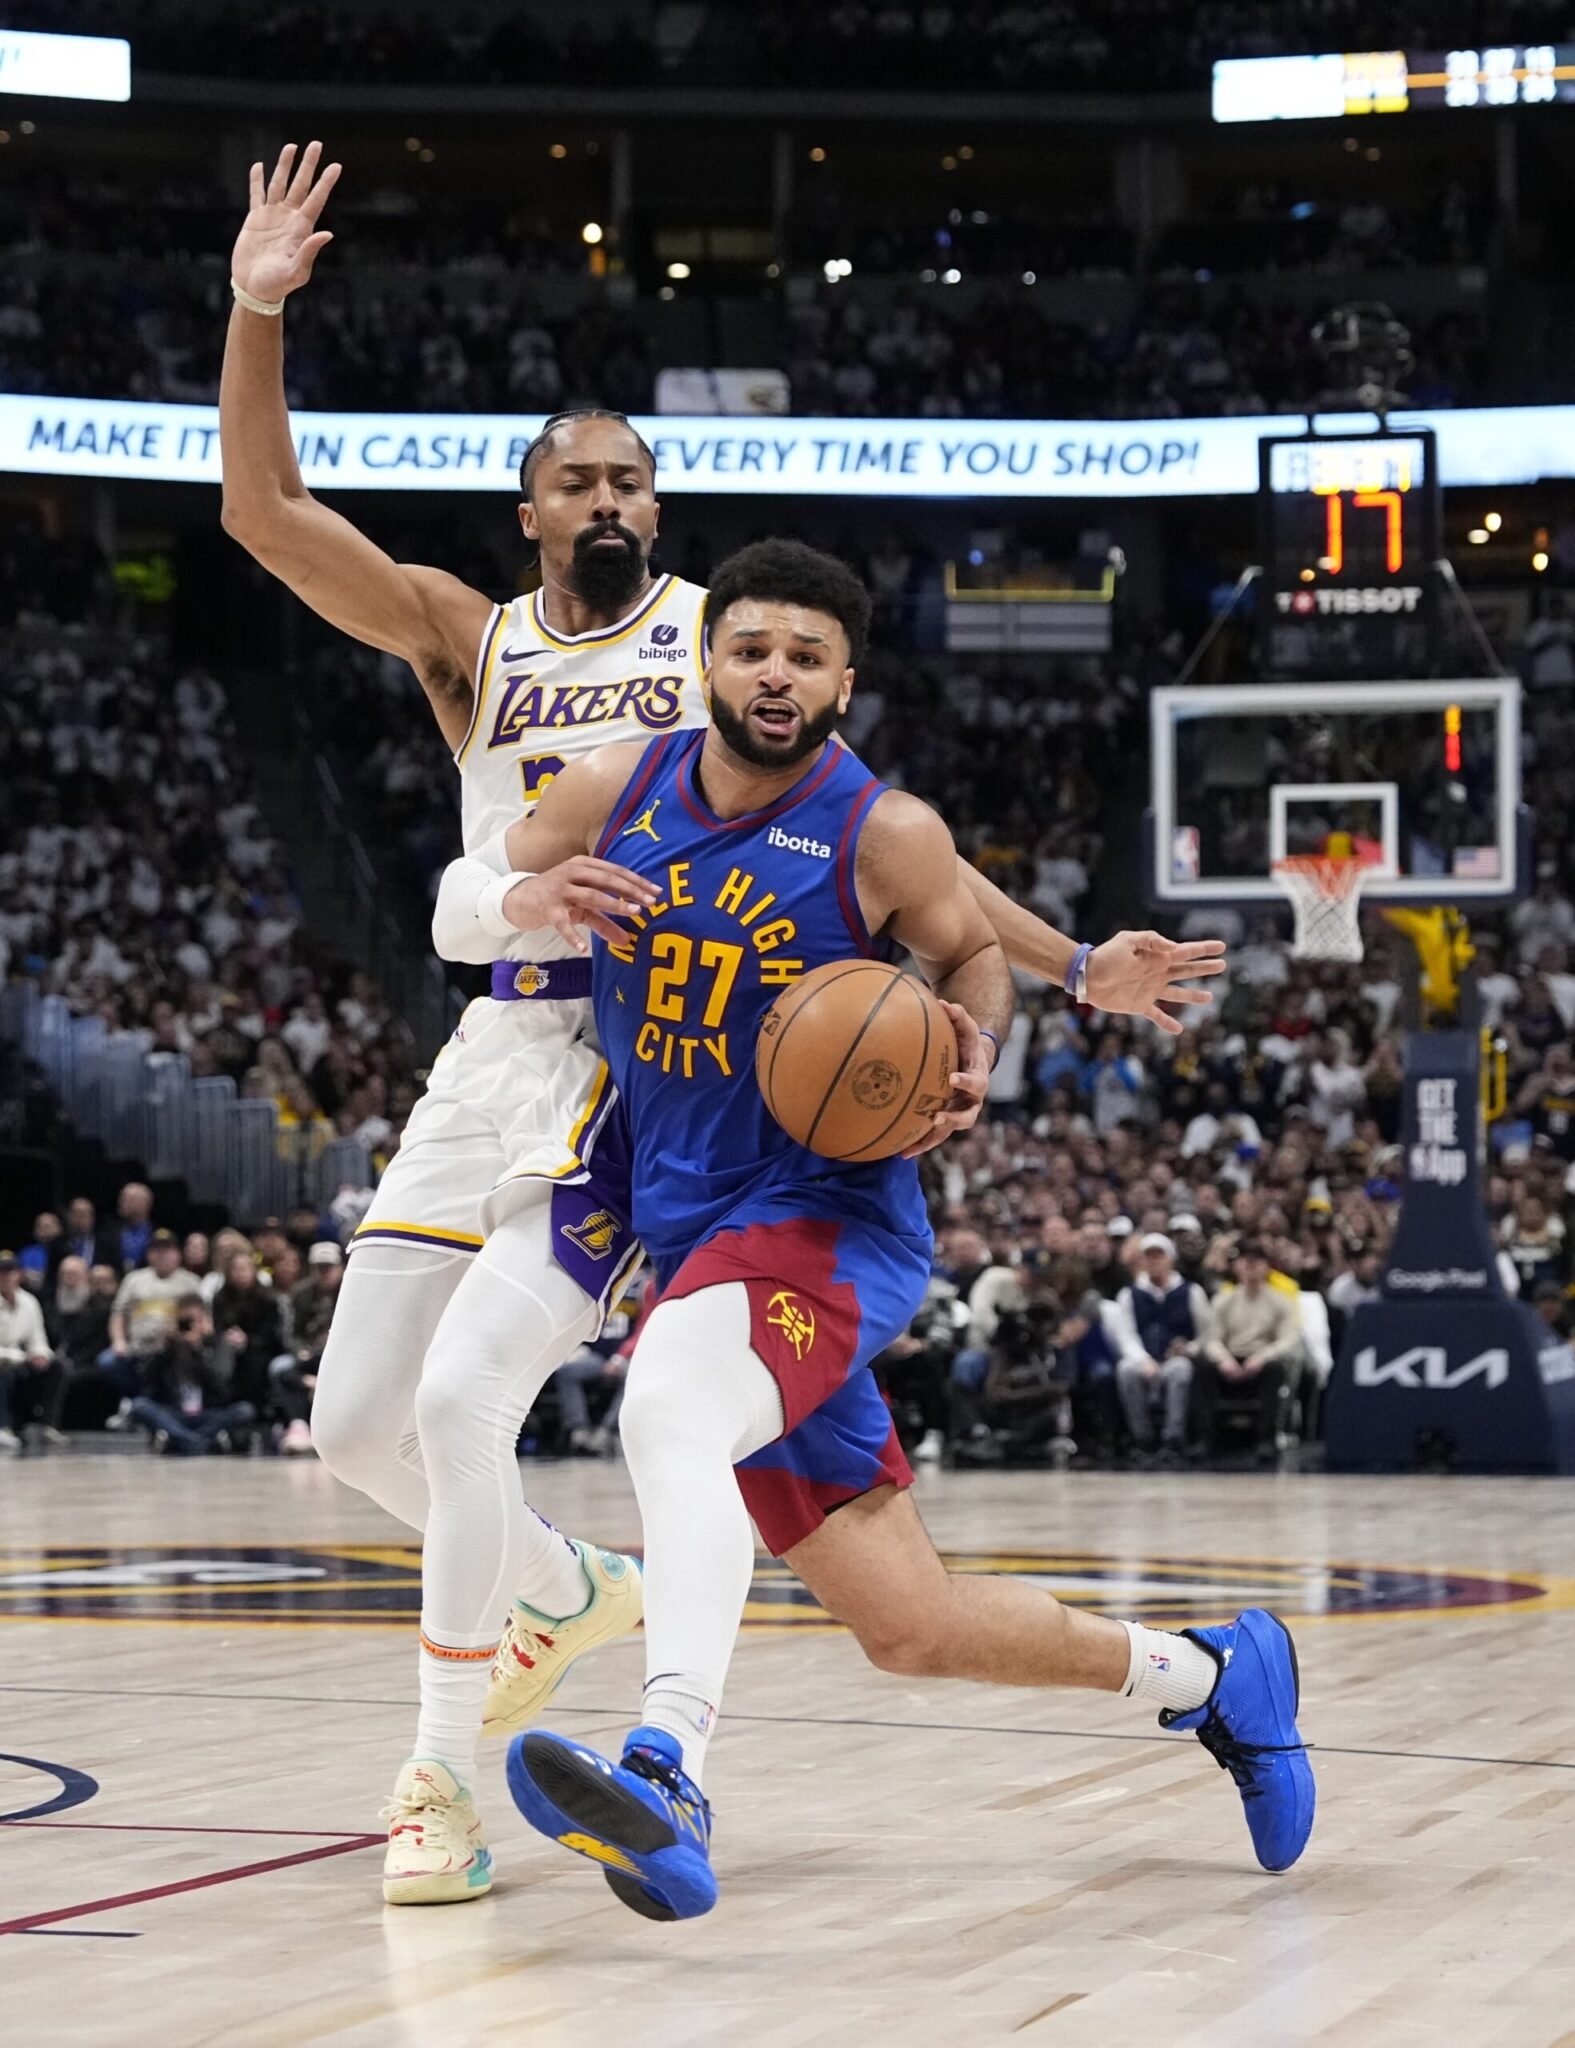 Denver Nuggets defeat the Los Angeles Lakers in the last seconds thanks to a buzzer-beater by Jamal Murray